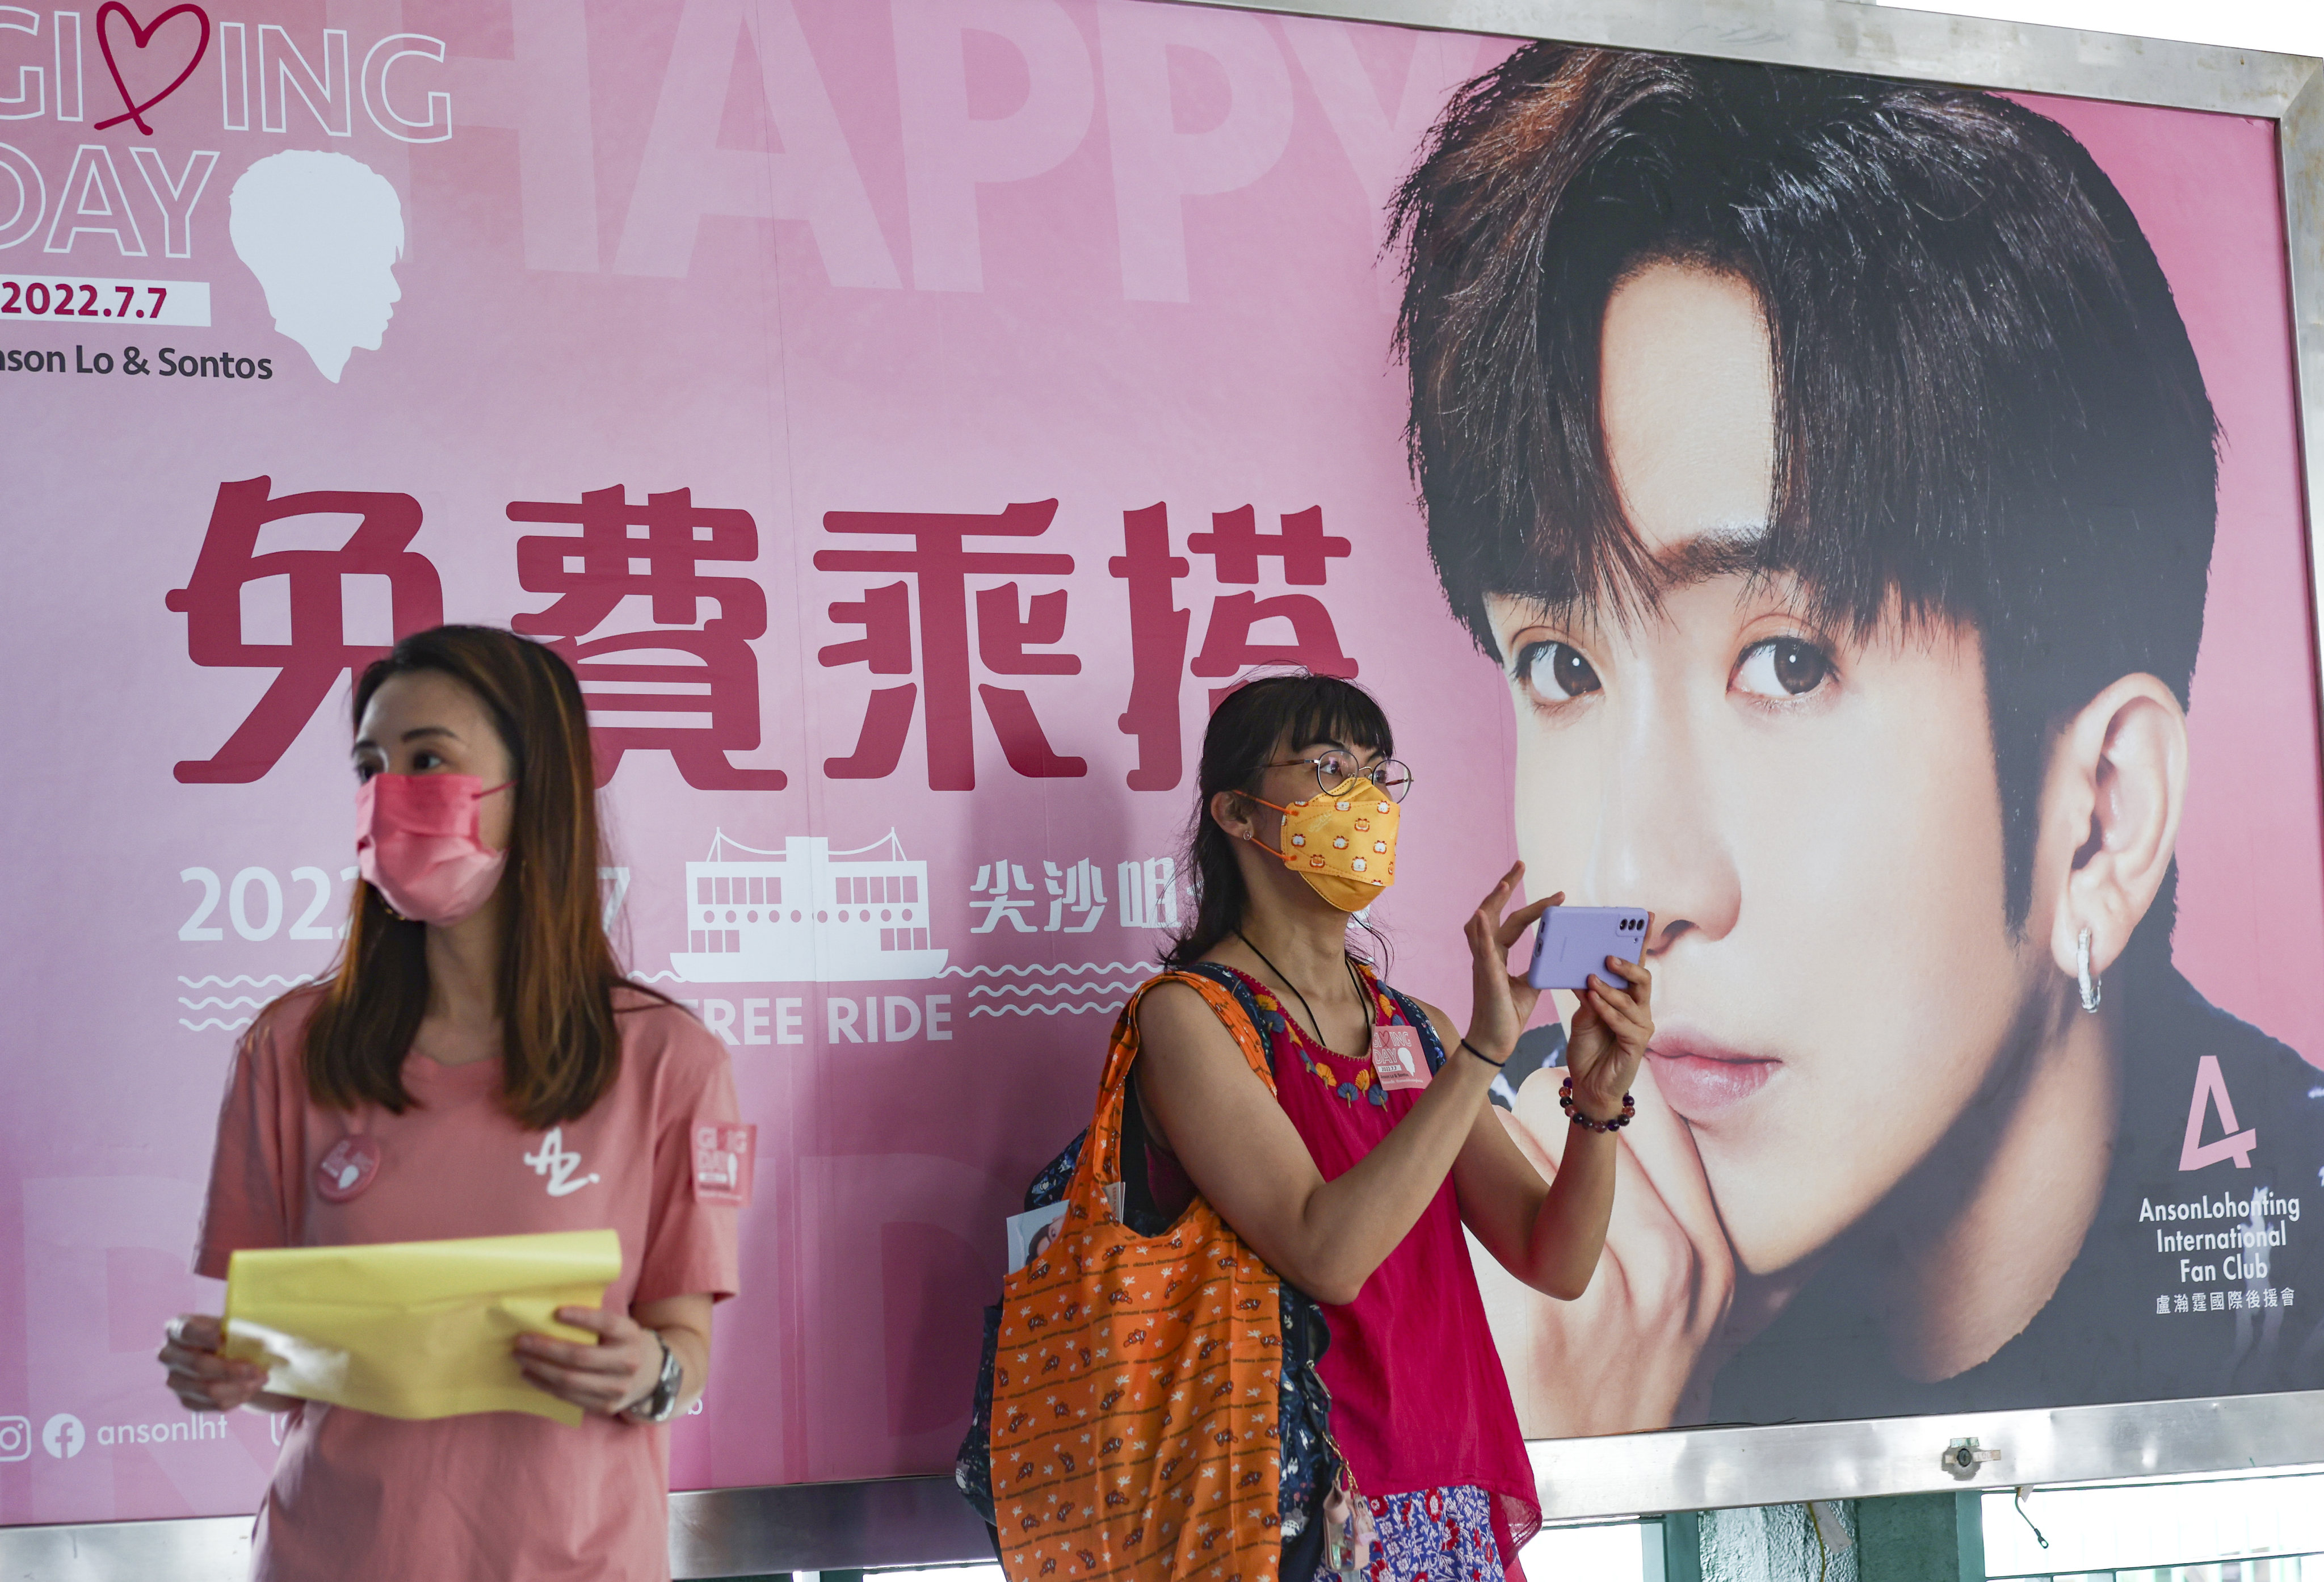 People enjoy a free ride day on the Star Ferry between Tsim Sha Tsui and Central paid for by fans of Mirror star Anson Lo mark his 27th birthday.
Photo: Yik Yeung-man.